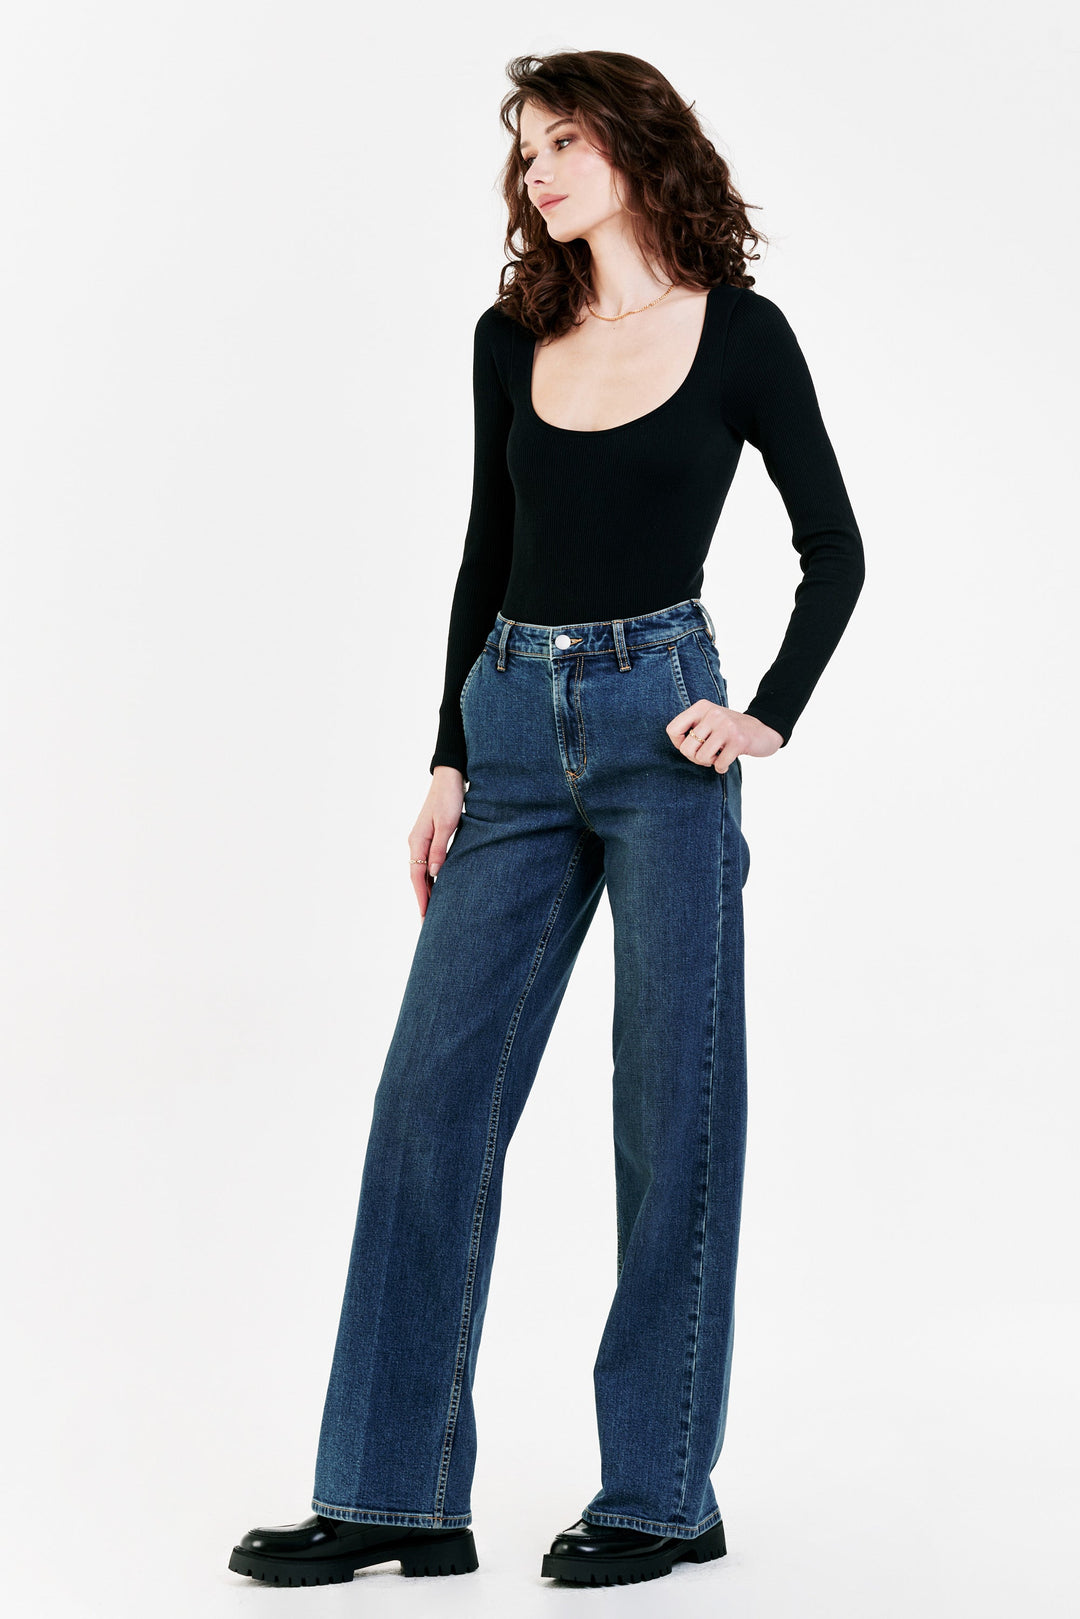 Plus Size Women's The Knit Jean by Catherines in Comfort Wash